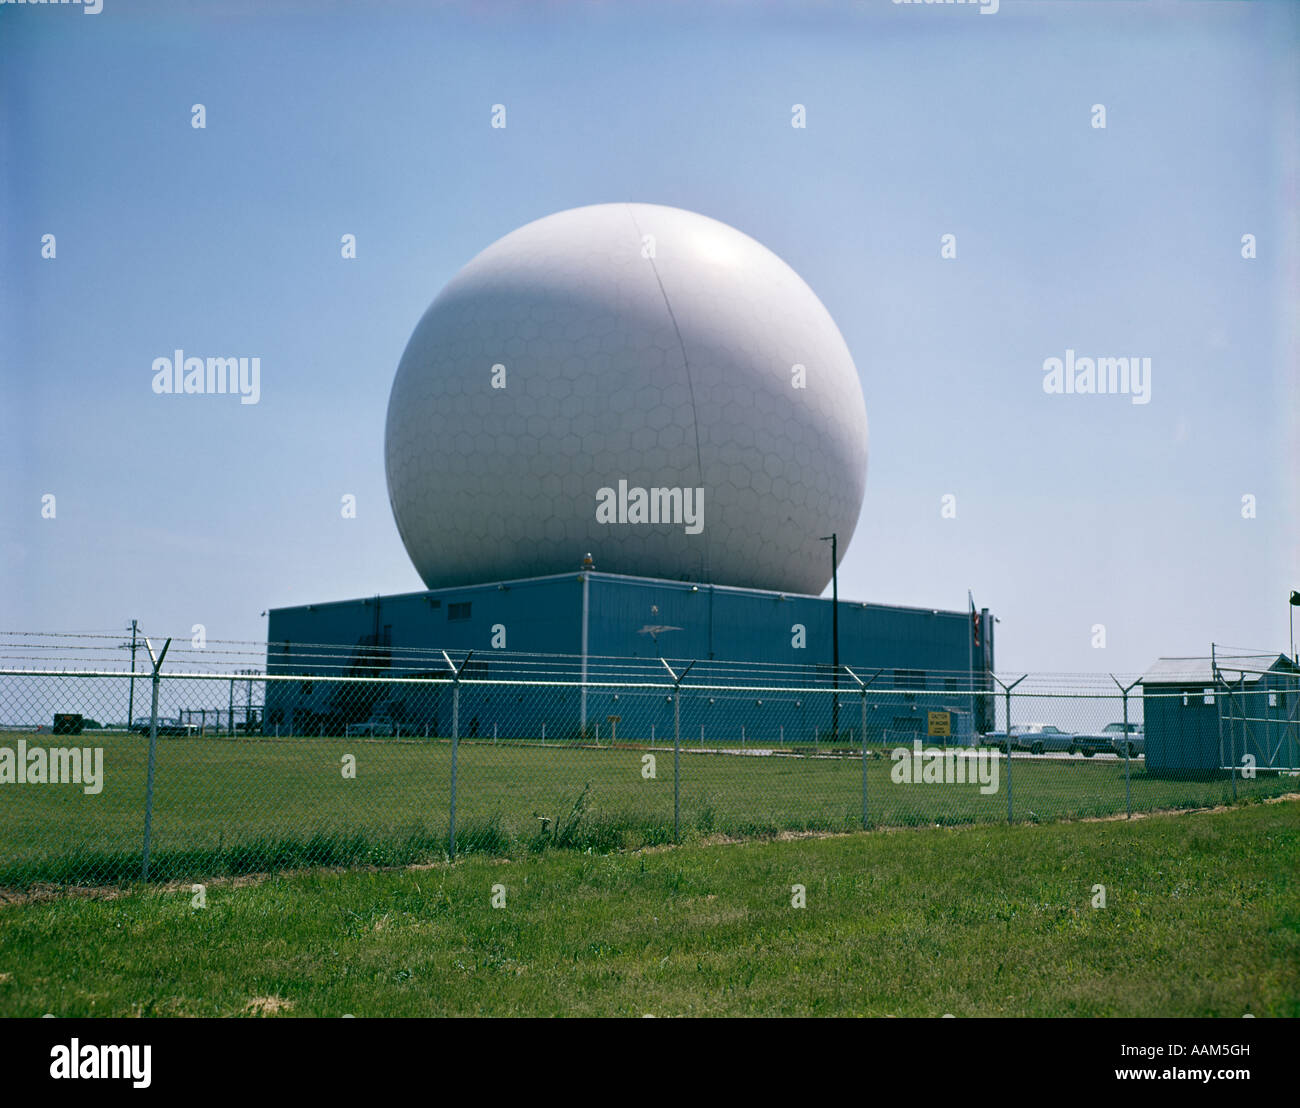 1970s EXTERIOR FACTORY PLANT INDUSTRIAL BUILDING SURROUNDED BY CHAIN LINK FENCE RADAR DOME SATELLITE RADIO COMMUNICATION Stock Photo